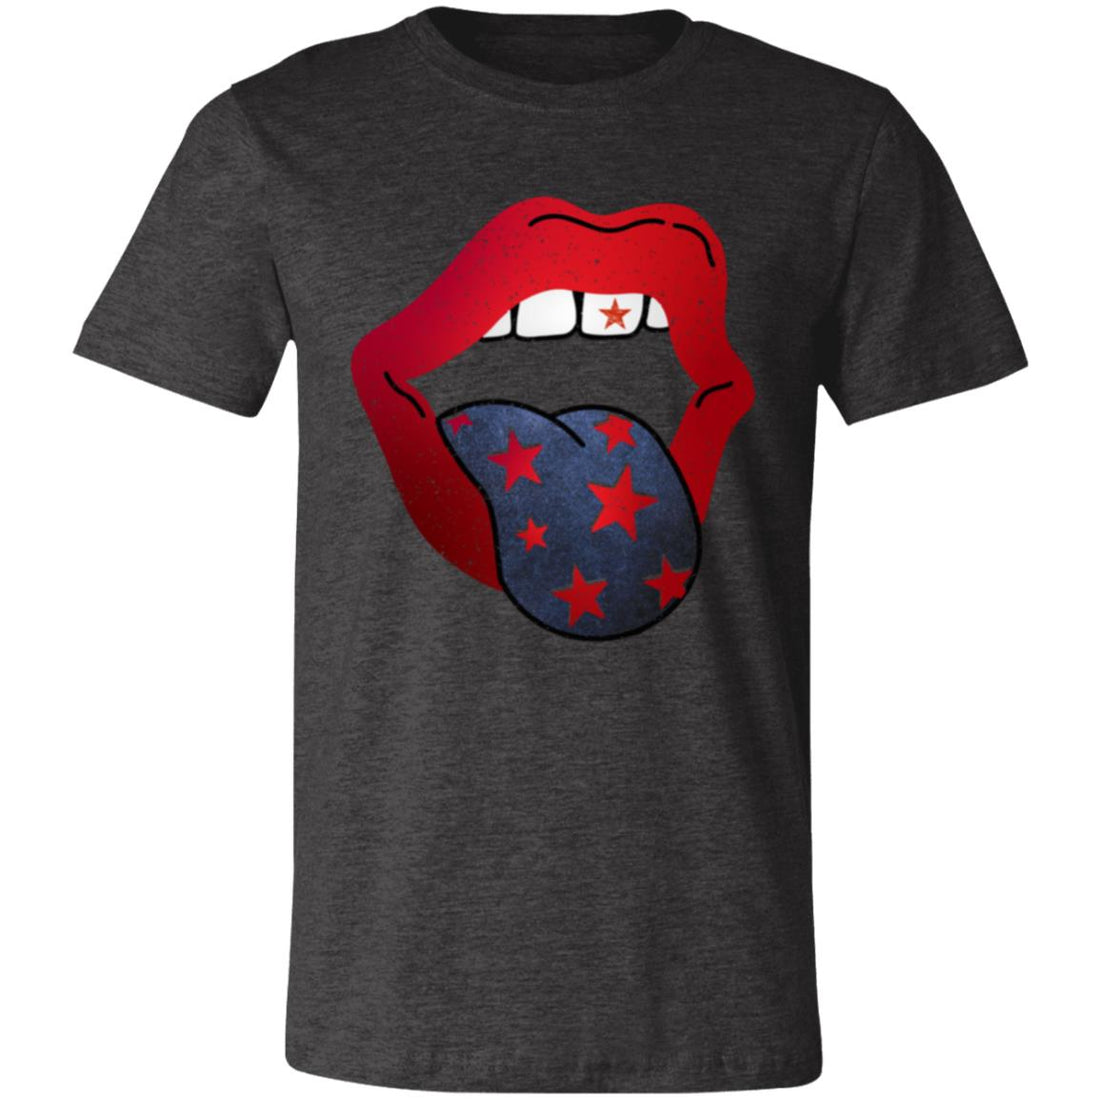 American Lips T-Shirt - T-Shirts - Positively Sassy - American Lips T-Shirt